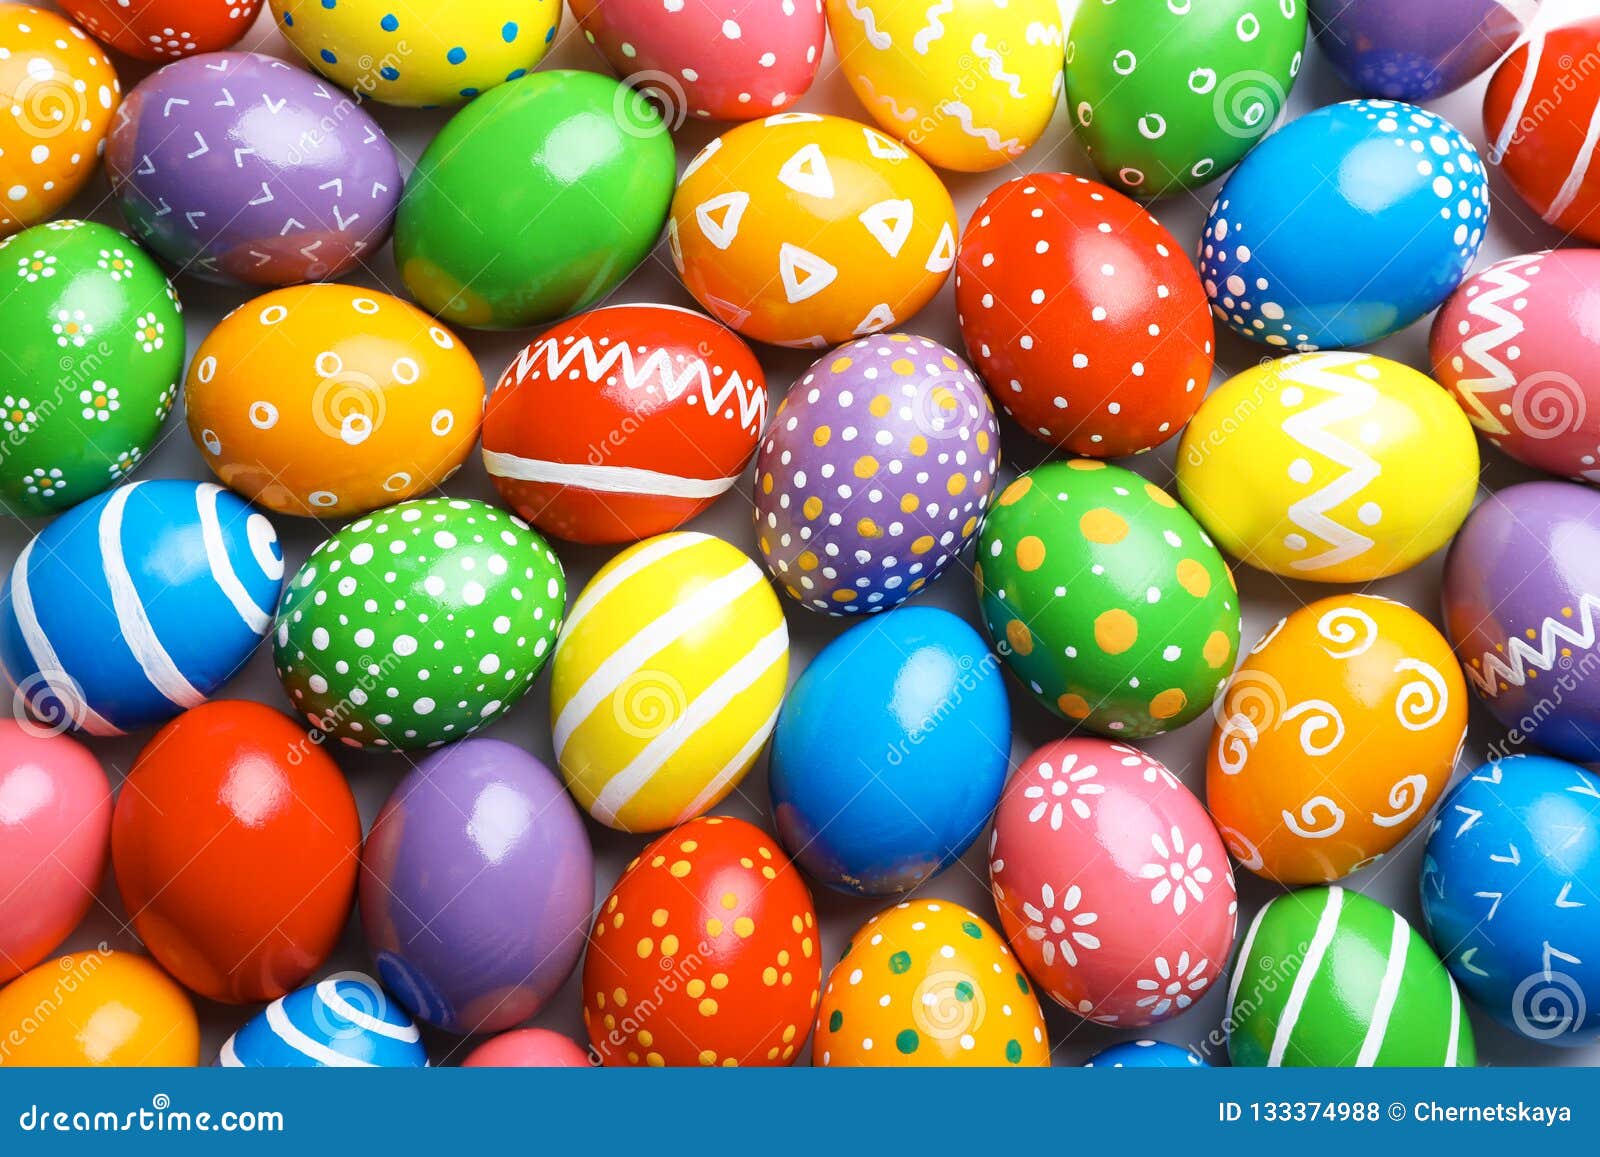 Many Decorated Easter Eggs As Background, Top View. Stock Photo - Image ...